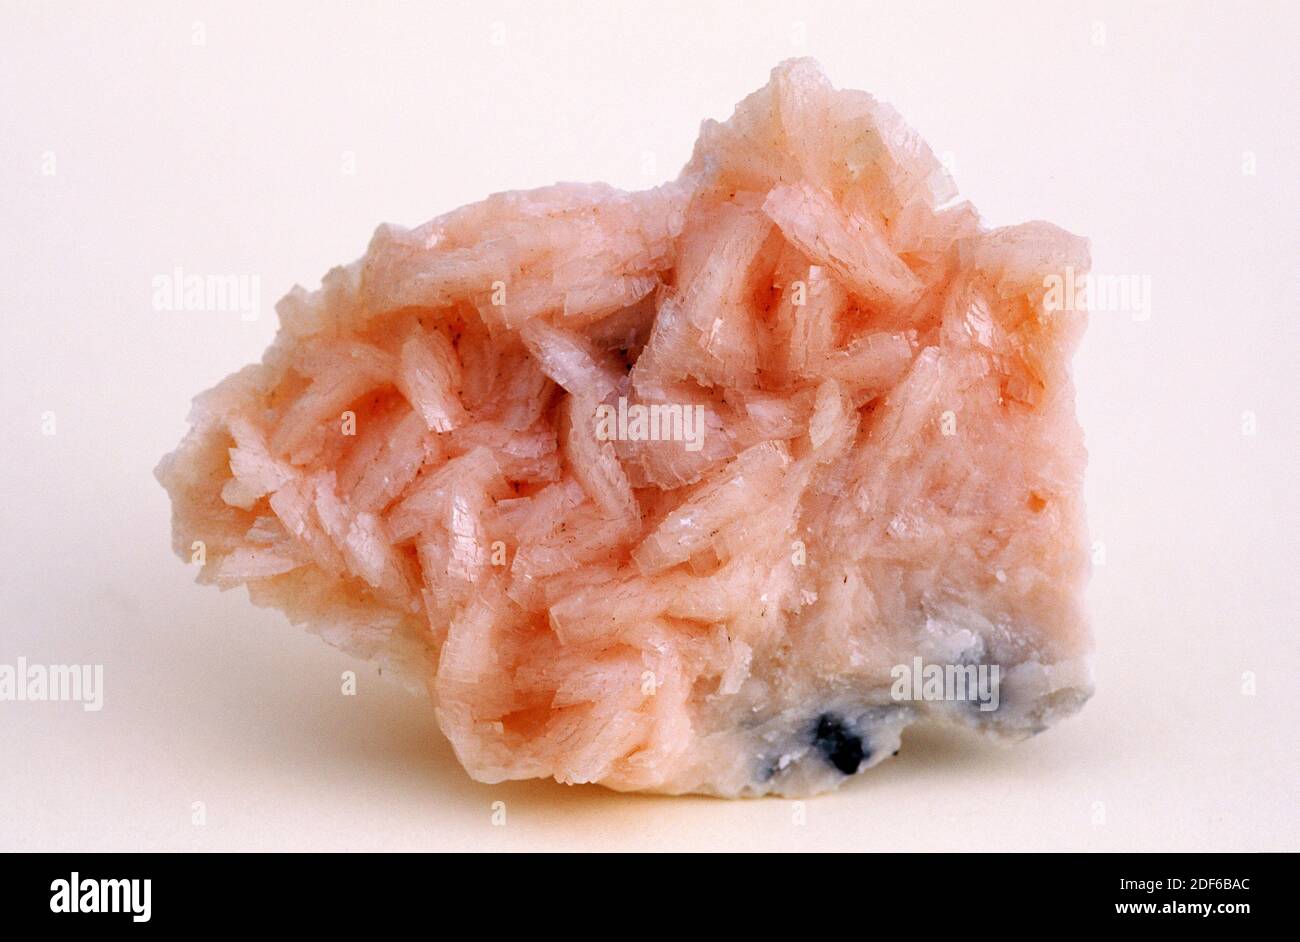 Dolomite is a mineral compossed of calcium magnesium carbonate. This sample comes from Italy. Stock Photo